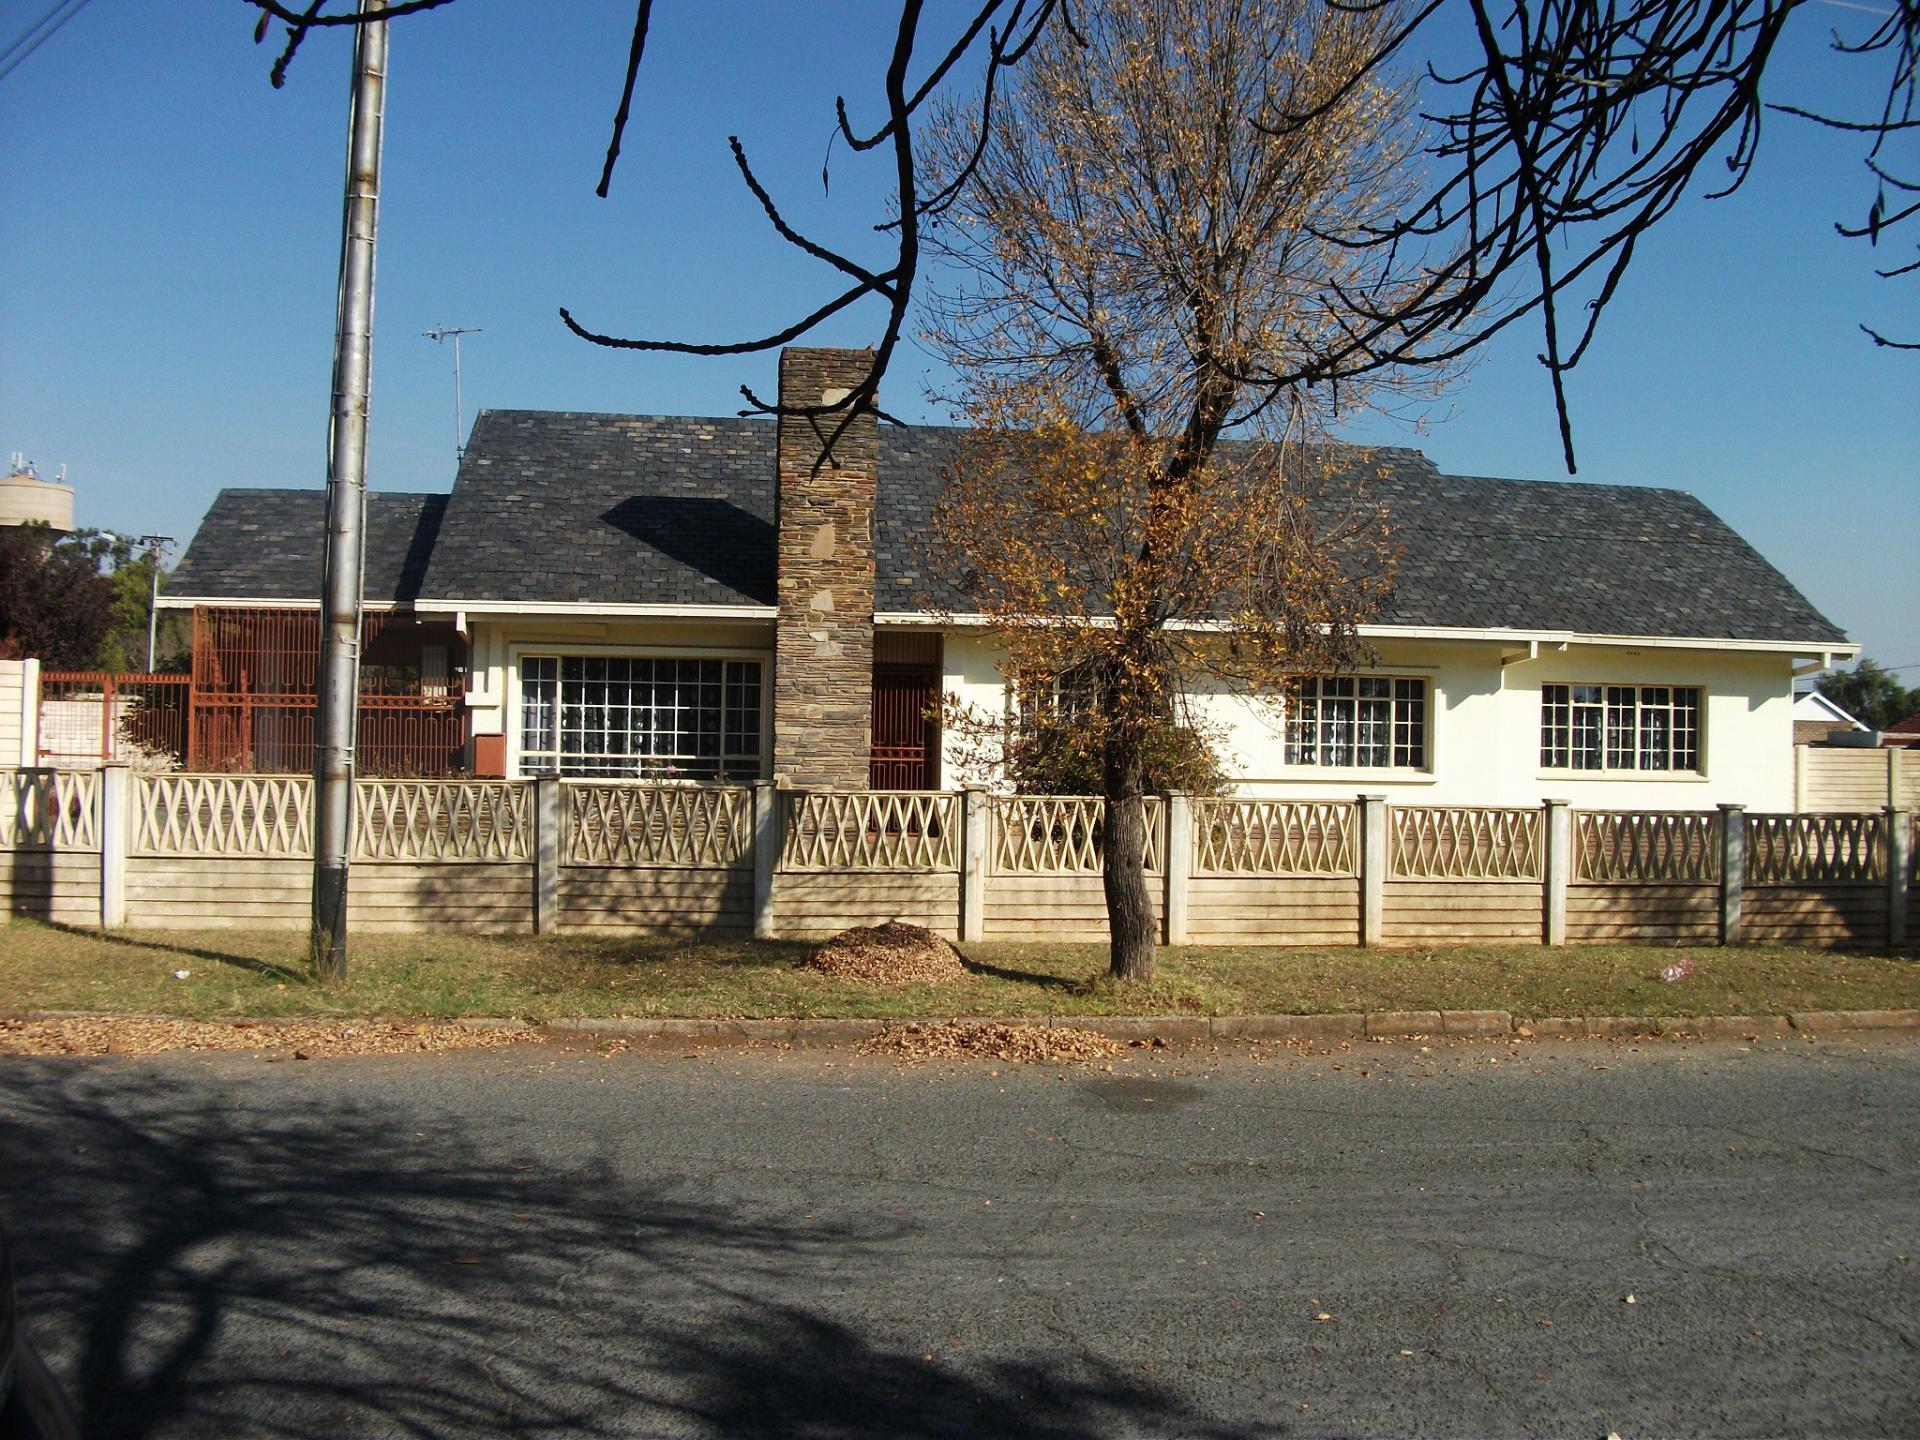 Front View of property in Greenhills